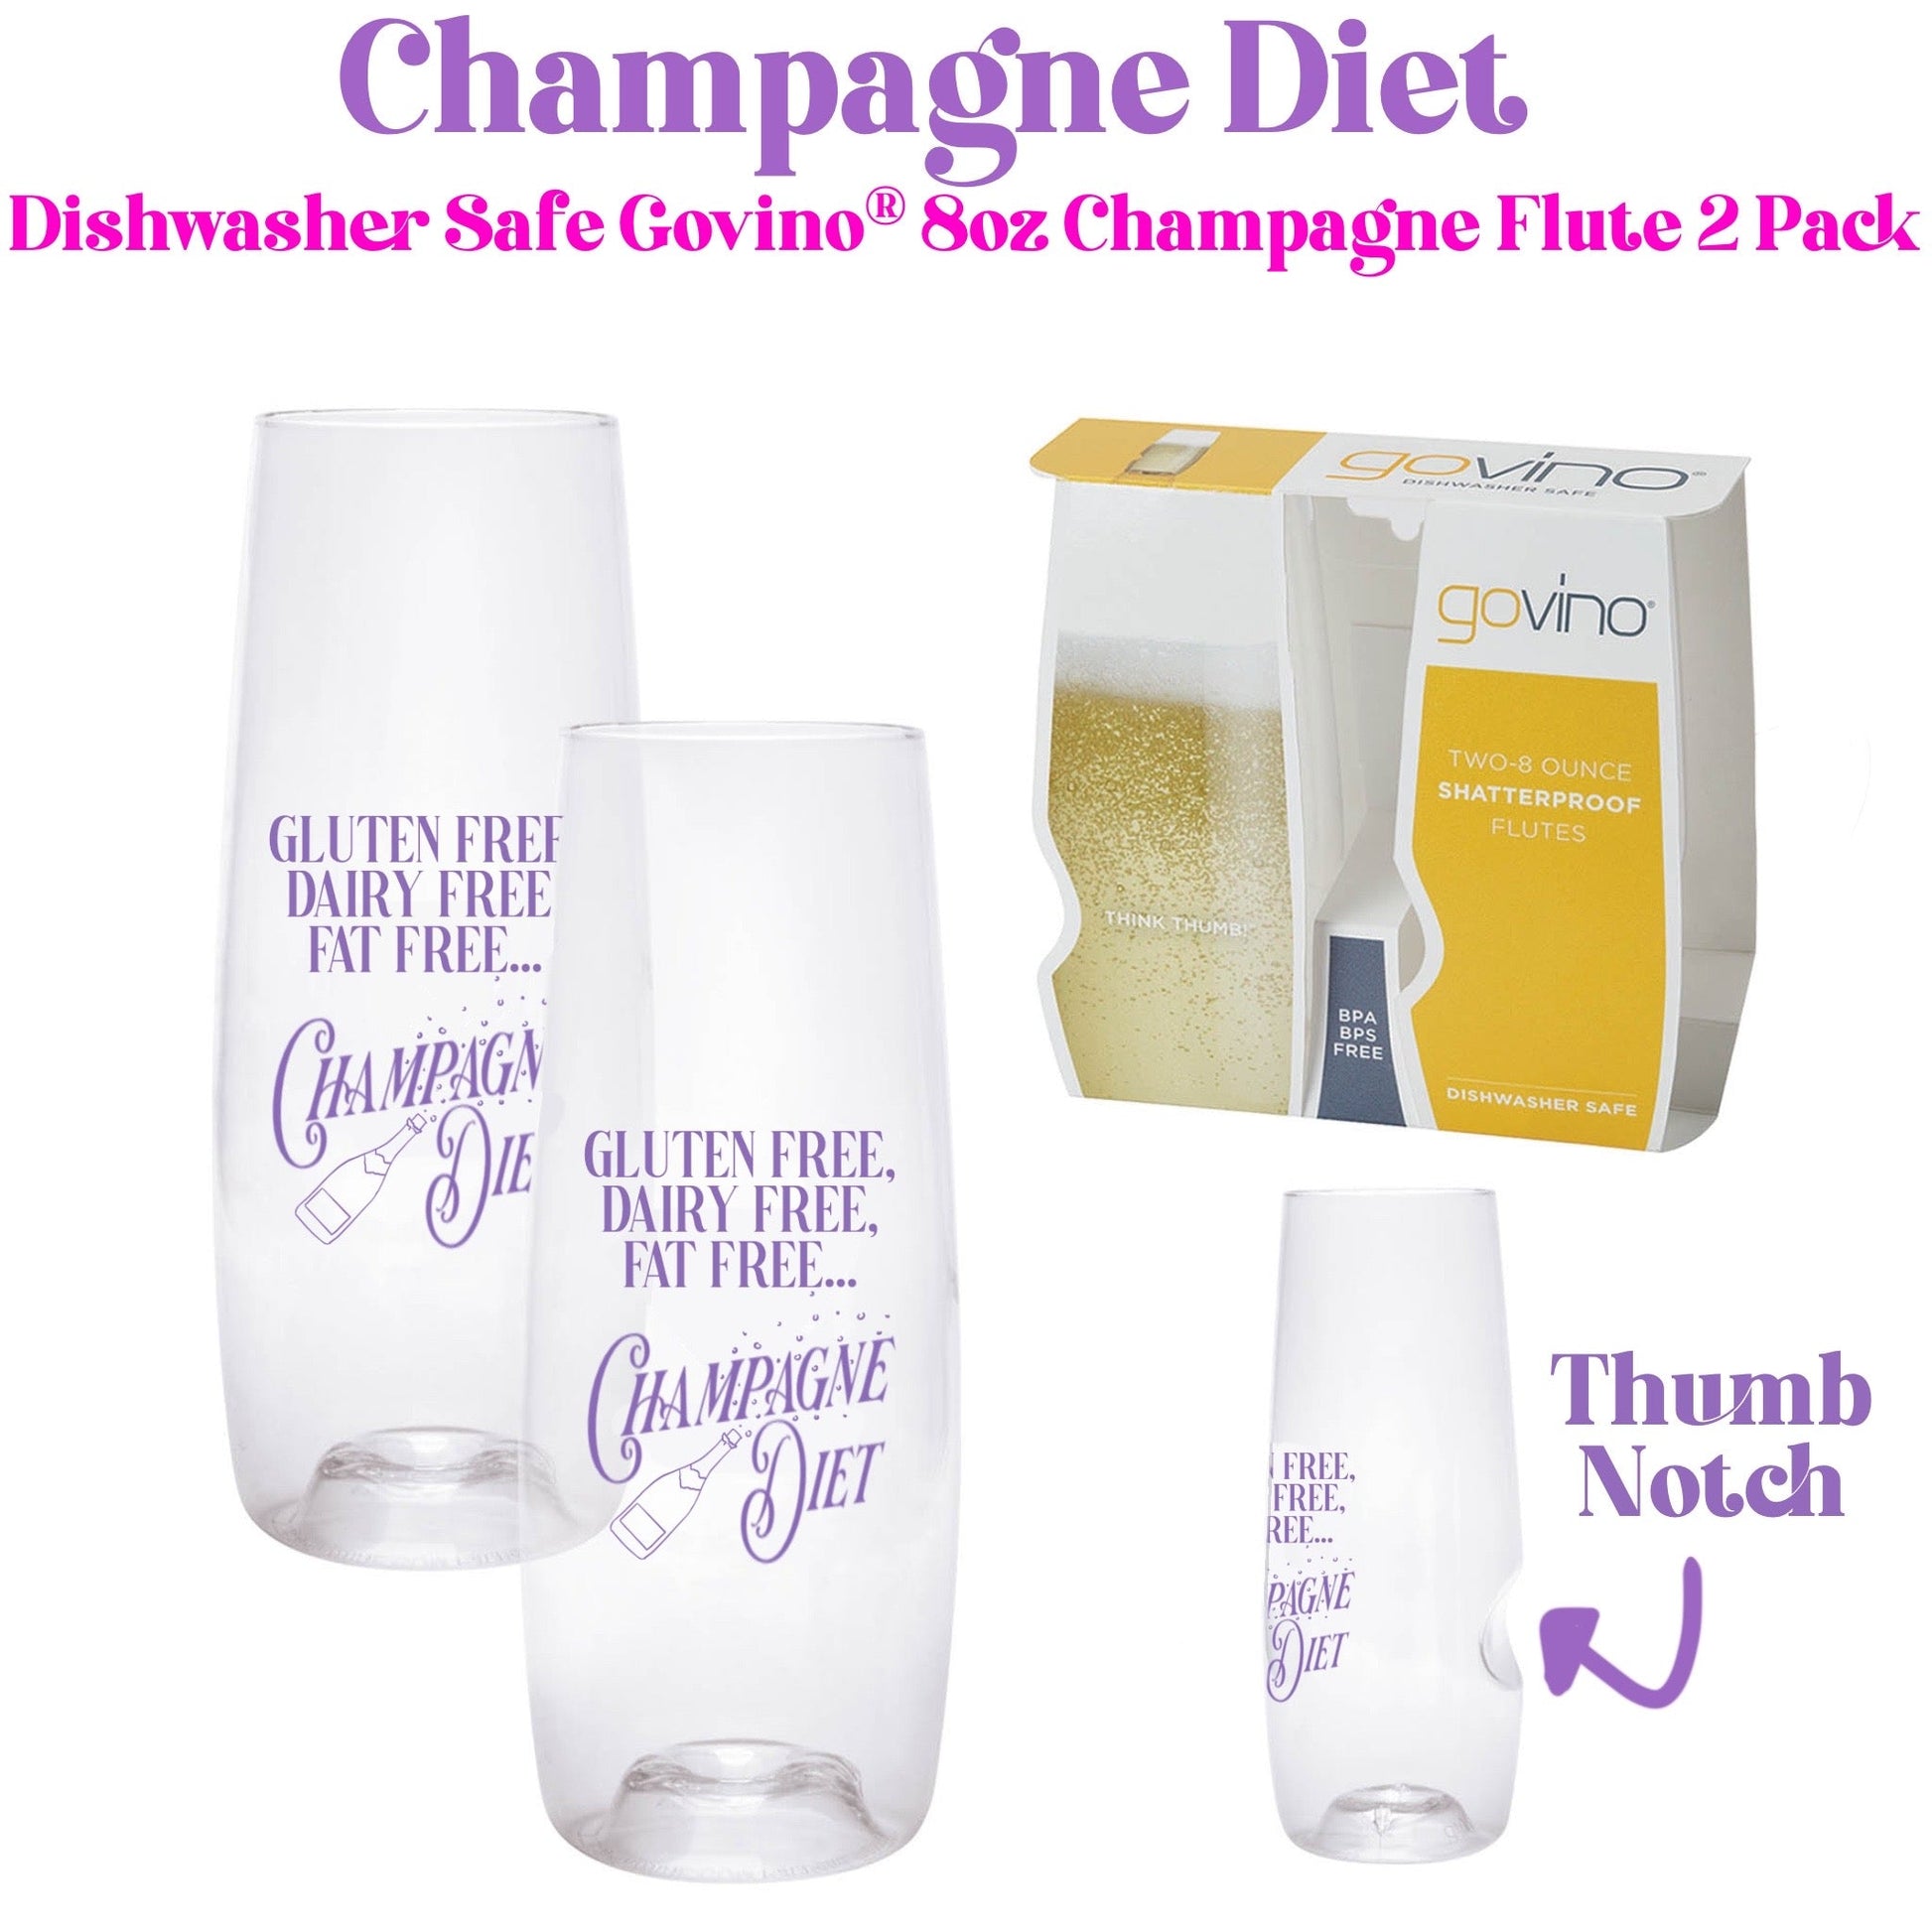 Champagne Flute with Thumb Notch. Art that says "Gluten Free, Dairy Free, Fat free.. Champagne Diet" with a Champagne bottle 